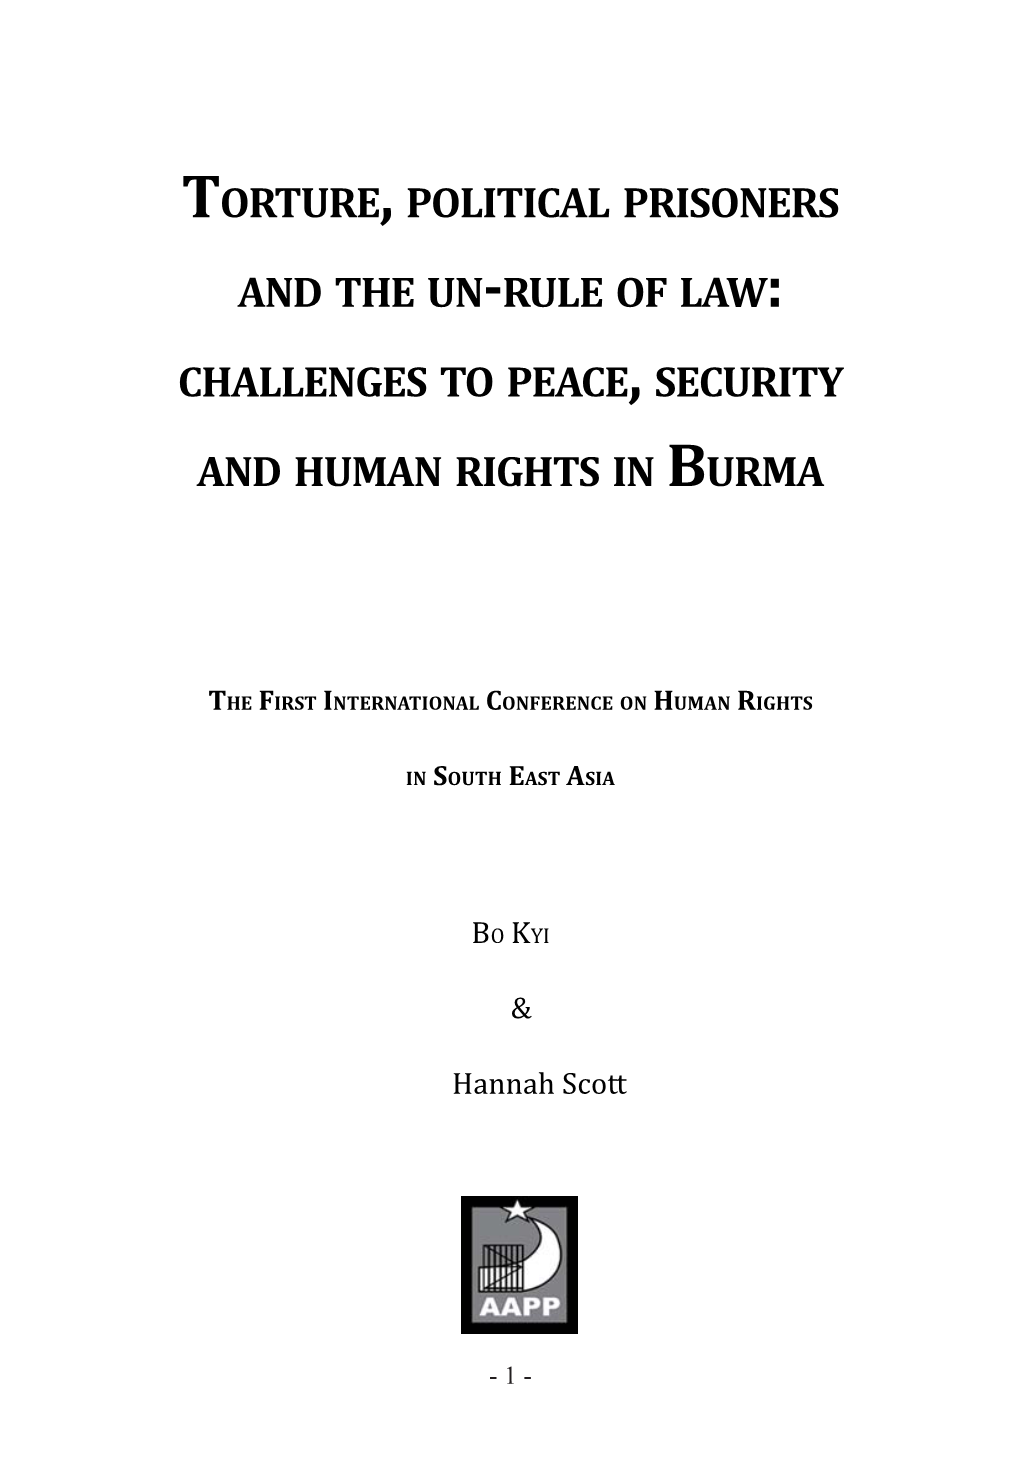 Torture, Political Prisoners and the Un-Rule of Law: Challenges to Peace, Security and Human Rights in Burma